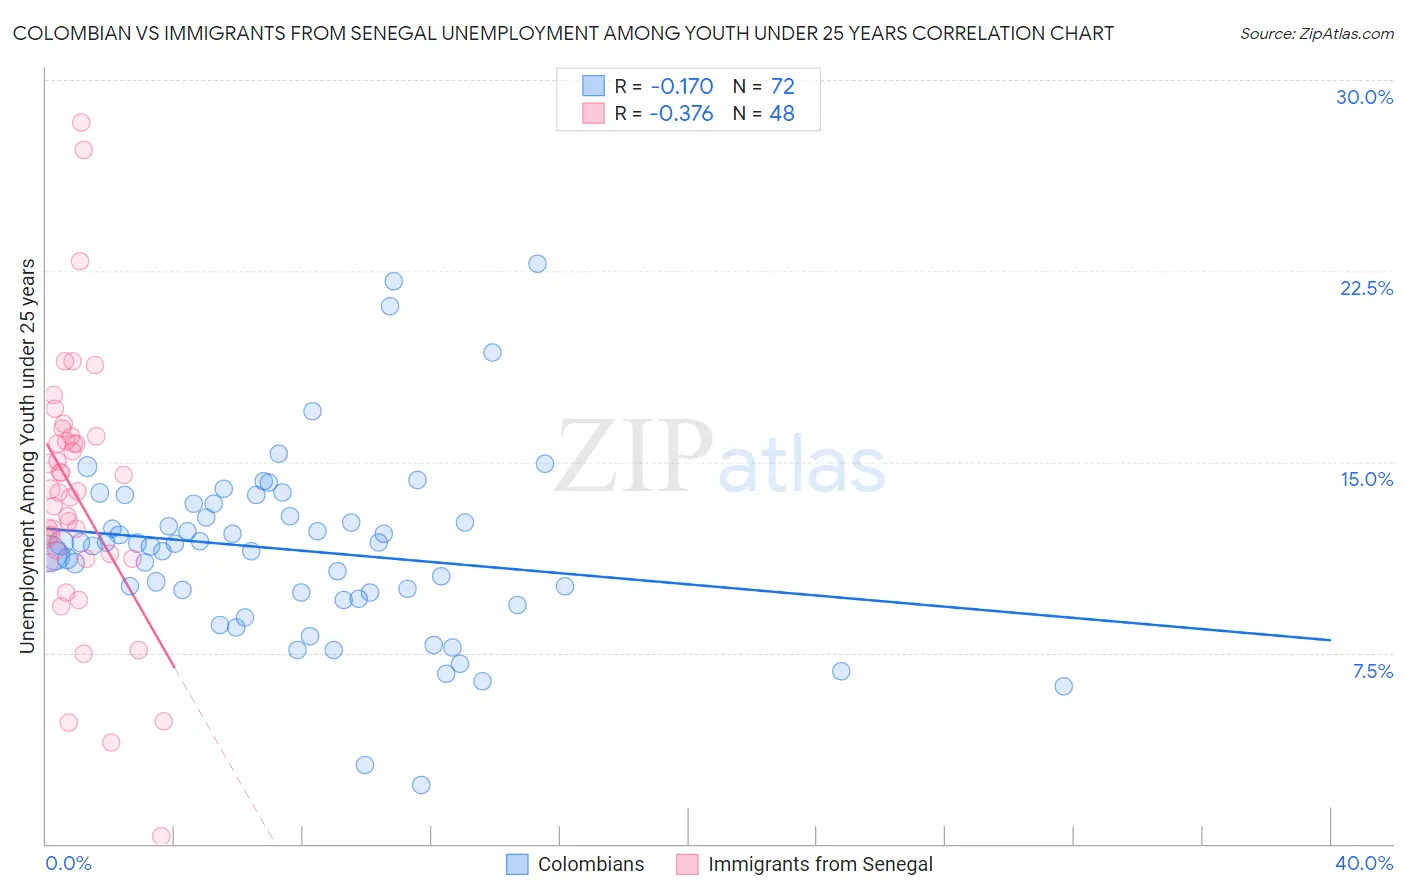 Colombian vs Immigrants from Senegal Unemployment Among Youth under 25 years